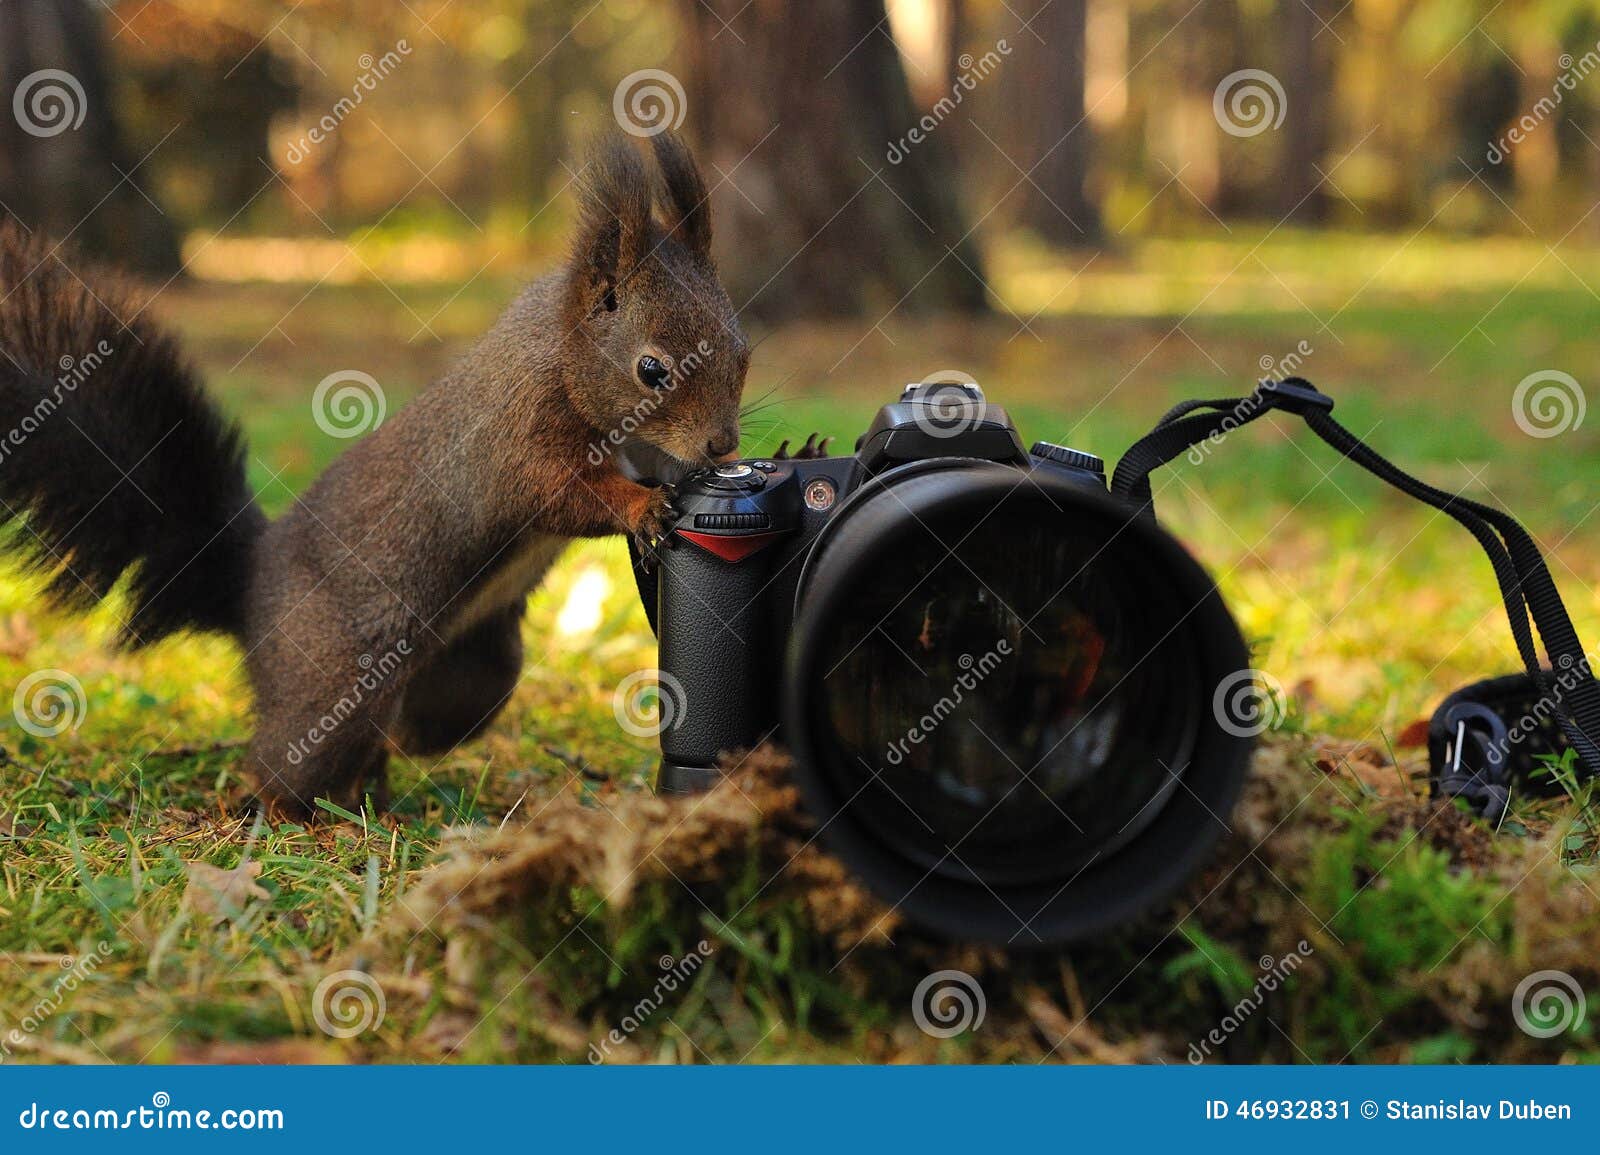 curious brown squirrel with camera